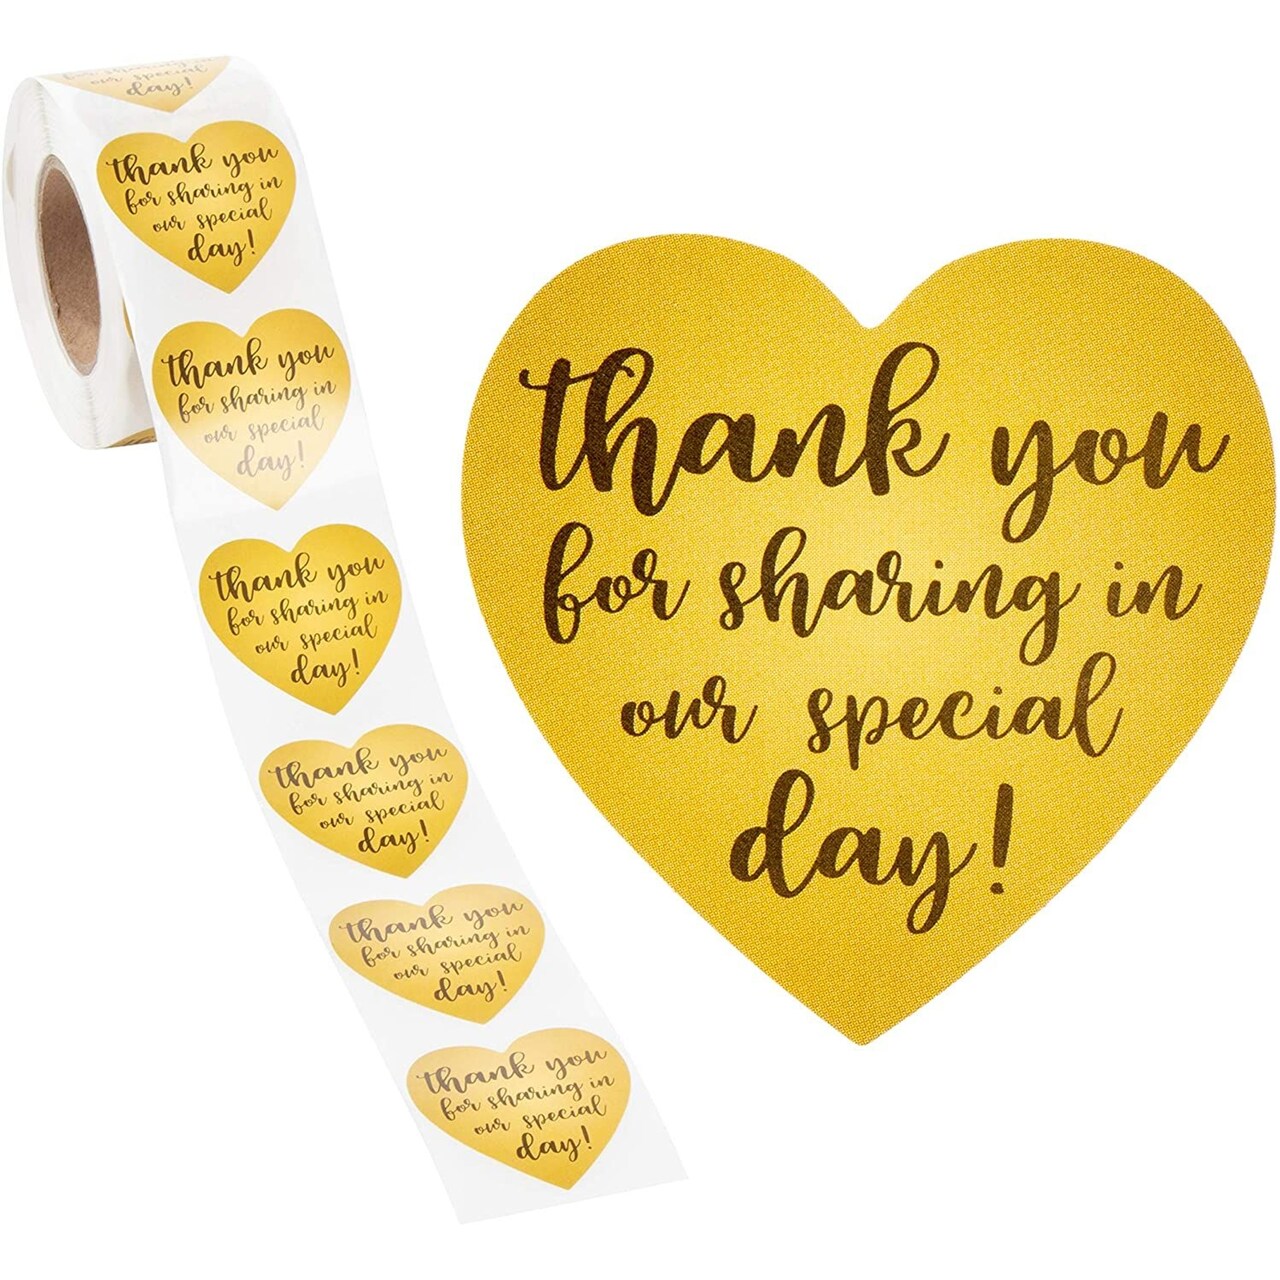 Thank You Stickers - 500-Count Wedding Favor Sticker Labels, Thank You for  Sharing in Our Special Day Stickers, Heart-Shaped Sticker Roll for Baby  Shower, Wedding, Birthday, Gold, 1.5 Inches Diameter